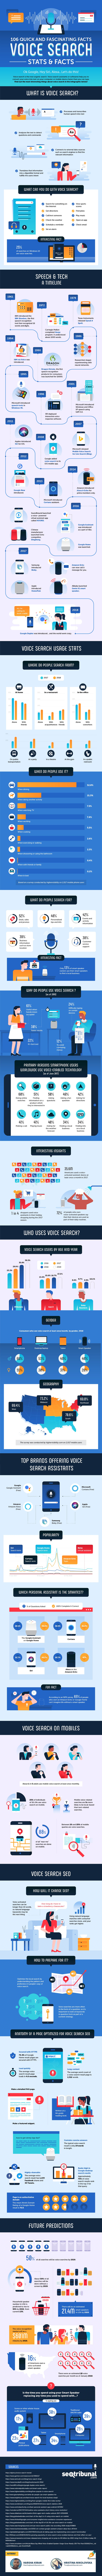 Voice Search Facts and Statistics [Infographic]